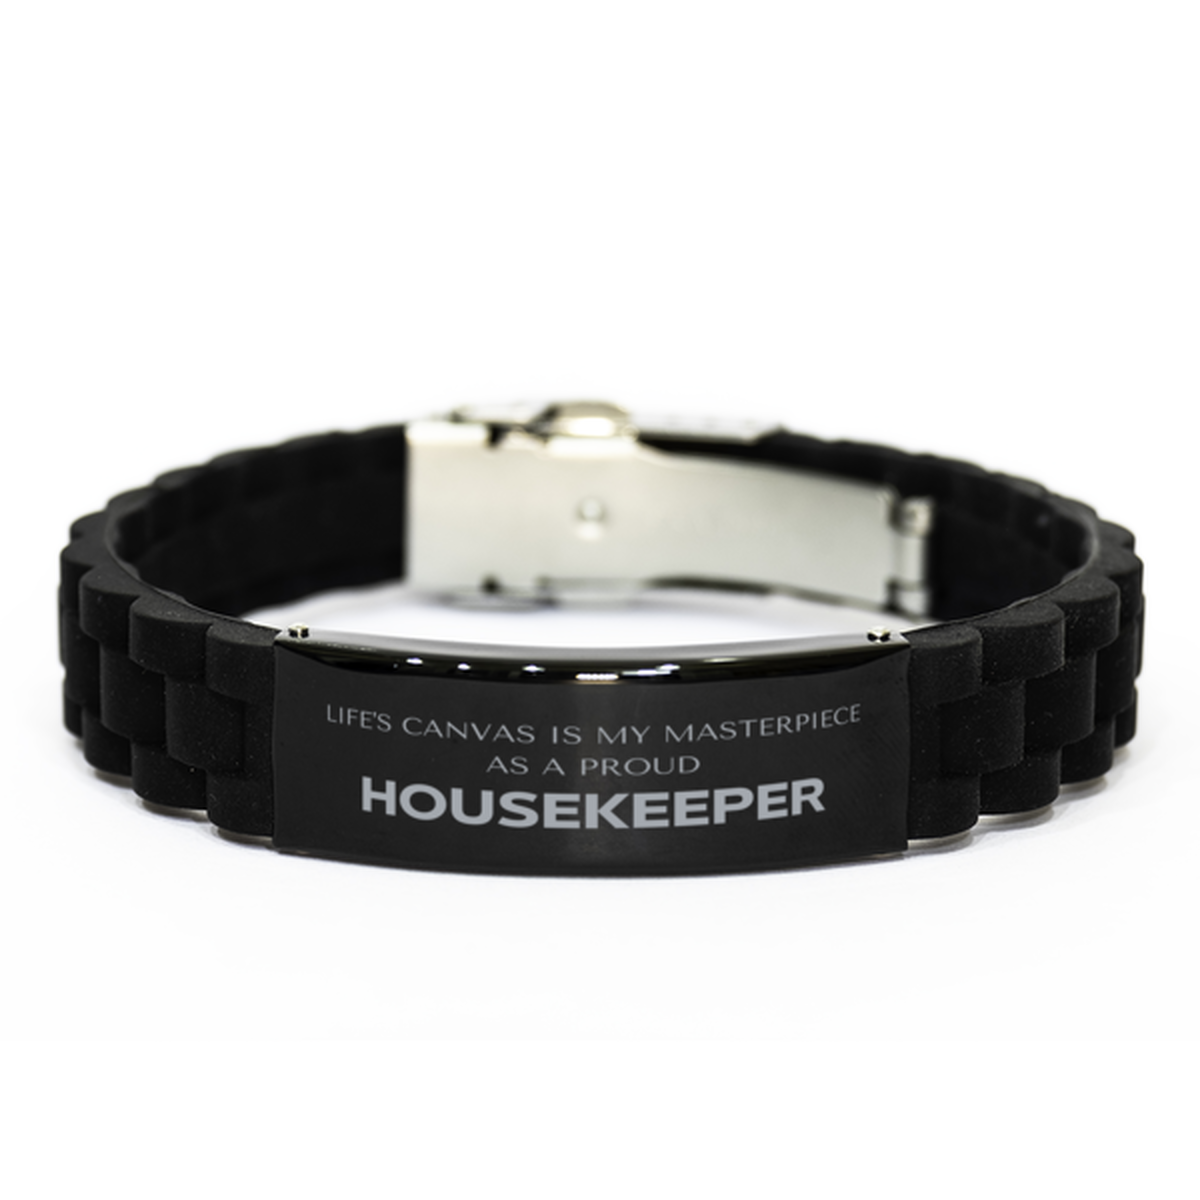 Proud Housekeeper Gifts, Life's canvas is my masterpiece, Epic Birthday Christmas Unique Black Glidelock Clasp Bracelet For Housekeeper, Coworkers, Men, Women, Friends